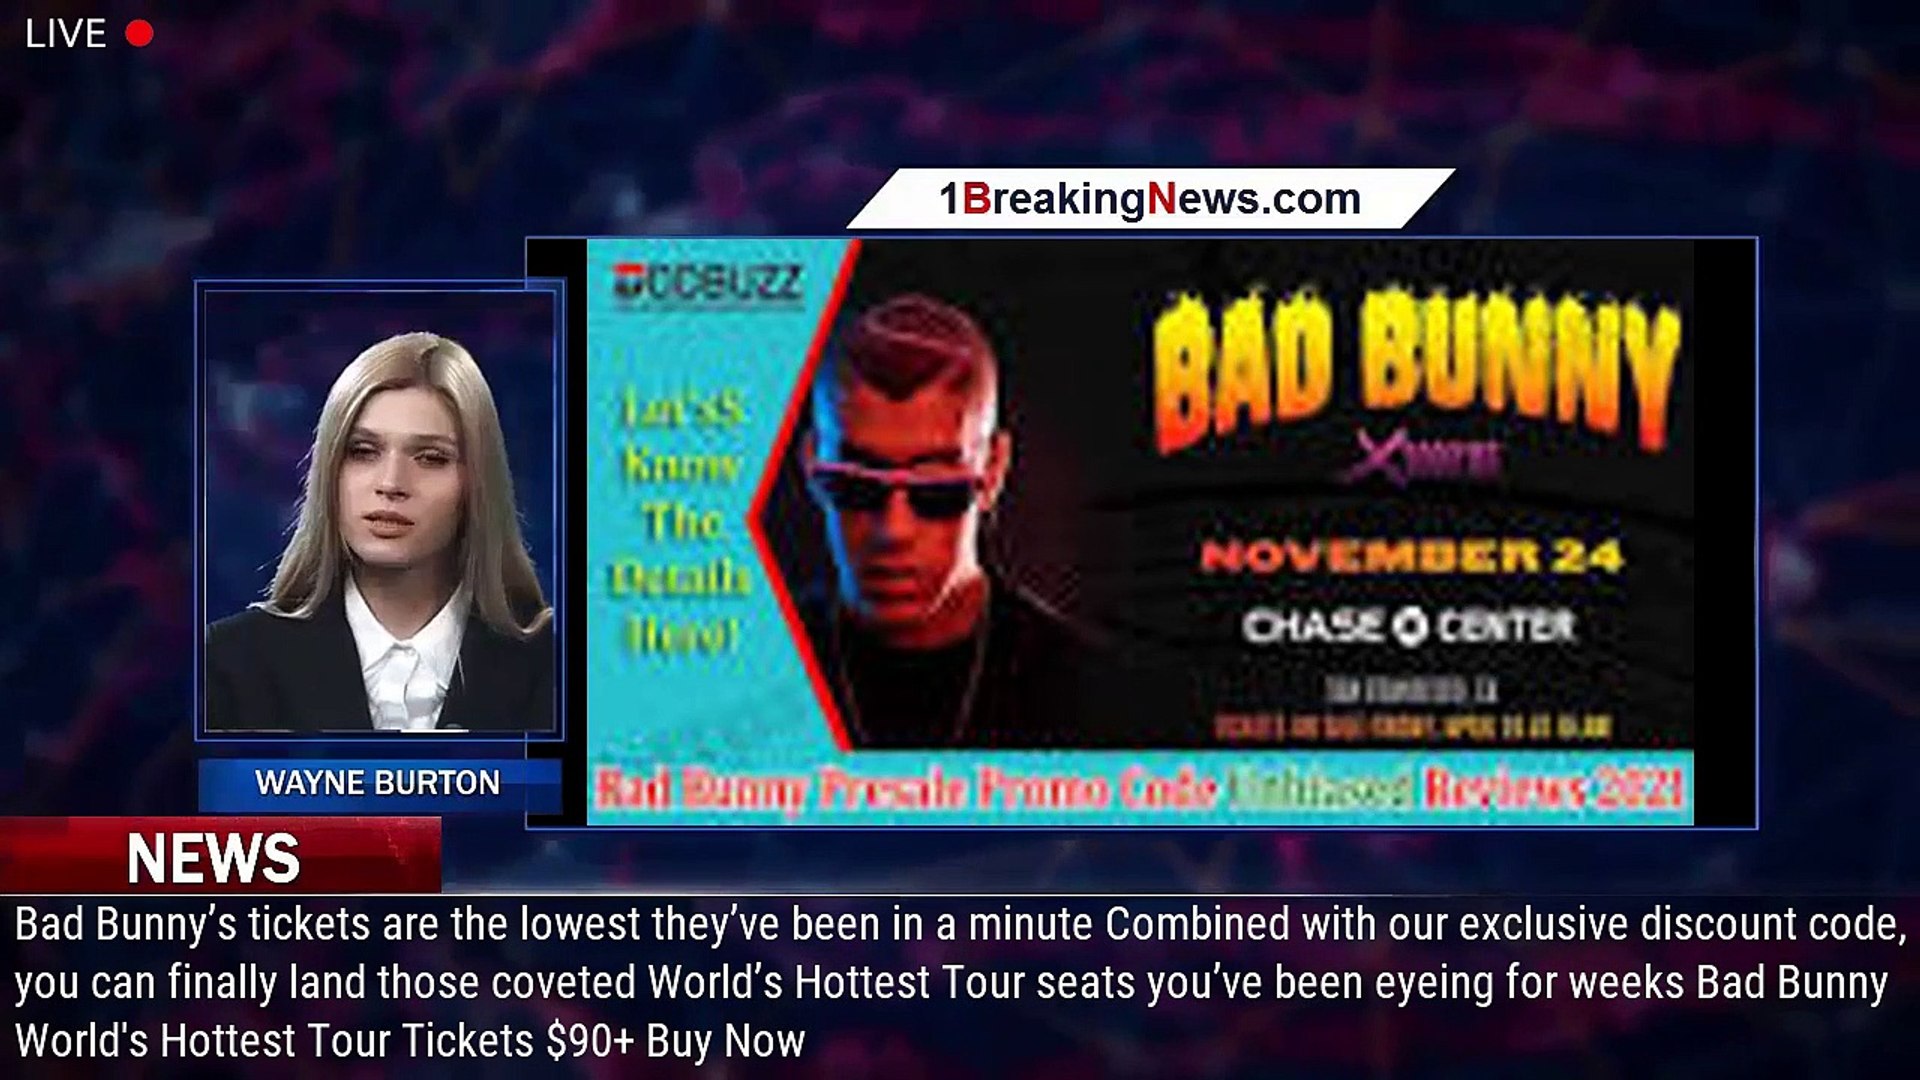 Bad Bunny Tickets Are at Their Cheapest—Use Our Exclusive Discount Code Before Prices Go Up - 1break